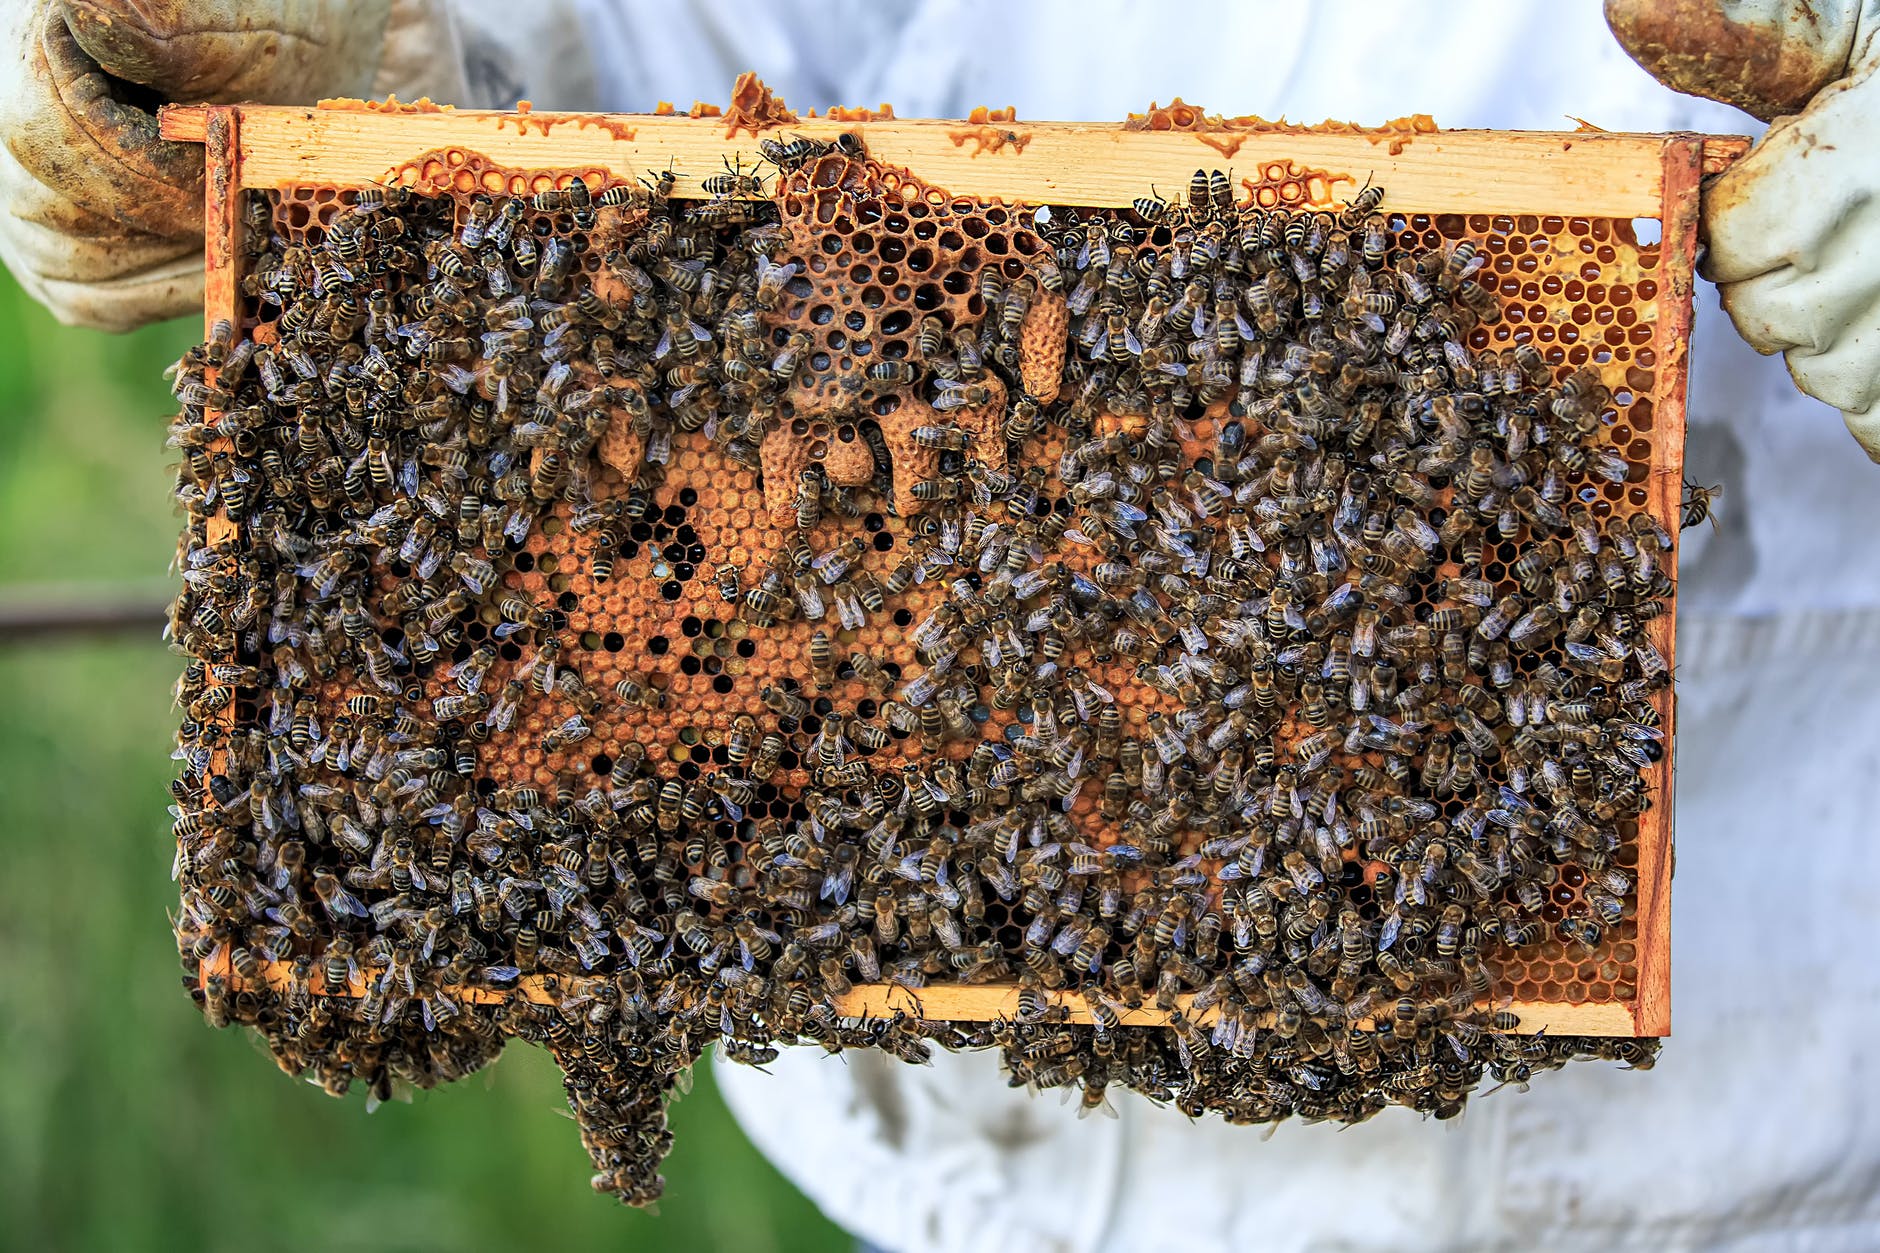 a swarm of honey bees on a beehive